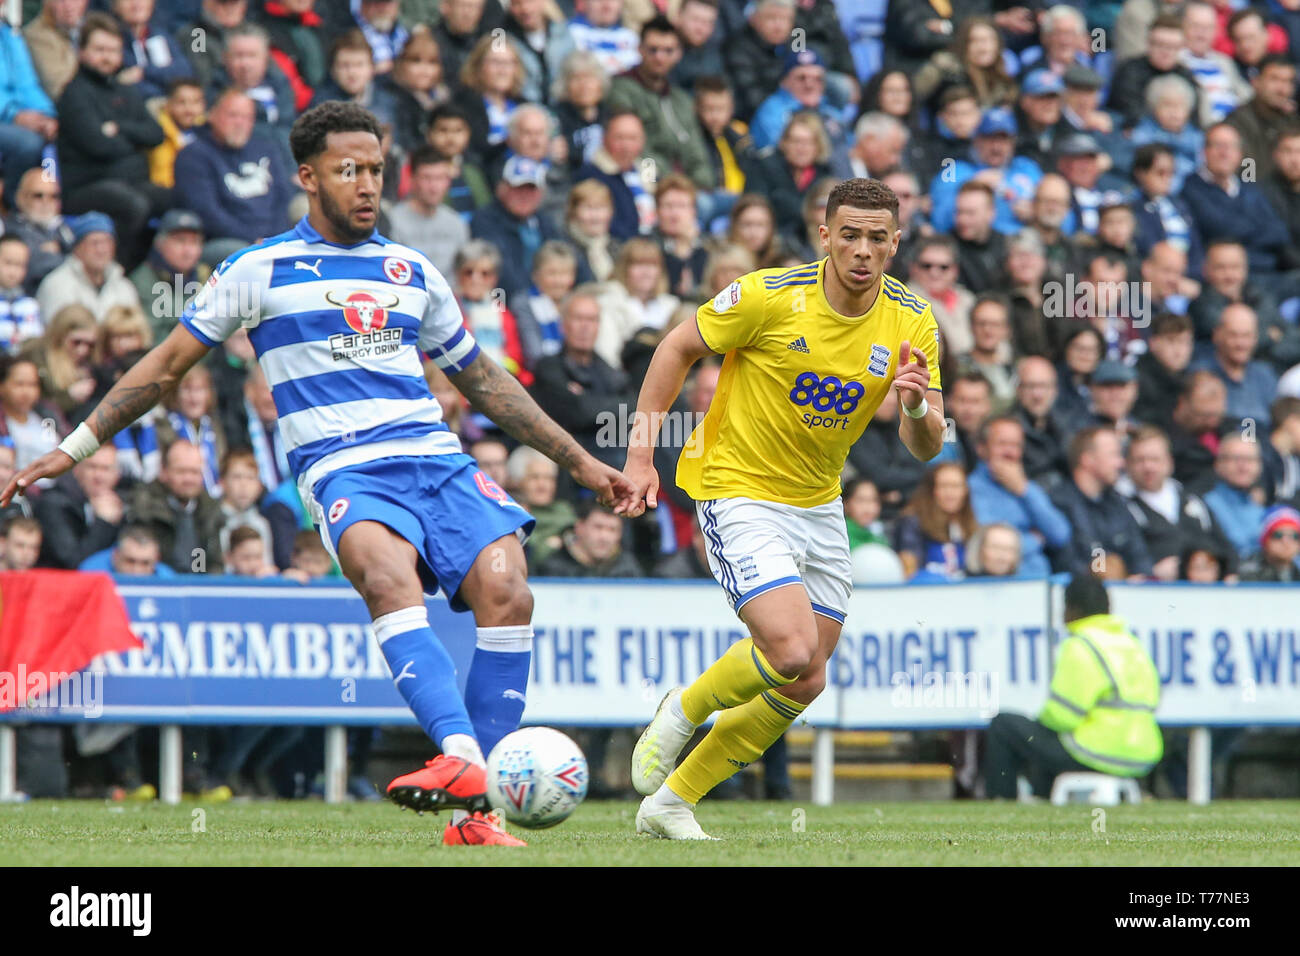 Reading, UK. 05th May, 2019. Sky Bet Championship, Reading vs Birmingham City ; Liam Moore (06) of Reading with the ball Credit: Matt O'Connor/News Images, English Football League images are subject to DataCo Licence Credit: News Images /Alamy Live News Stock Photo